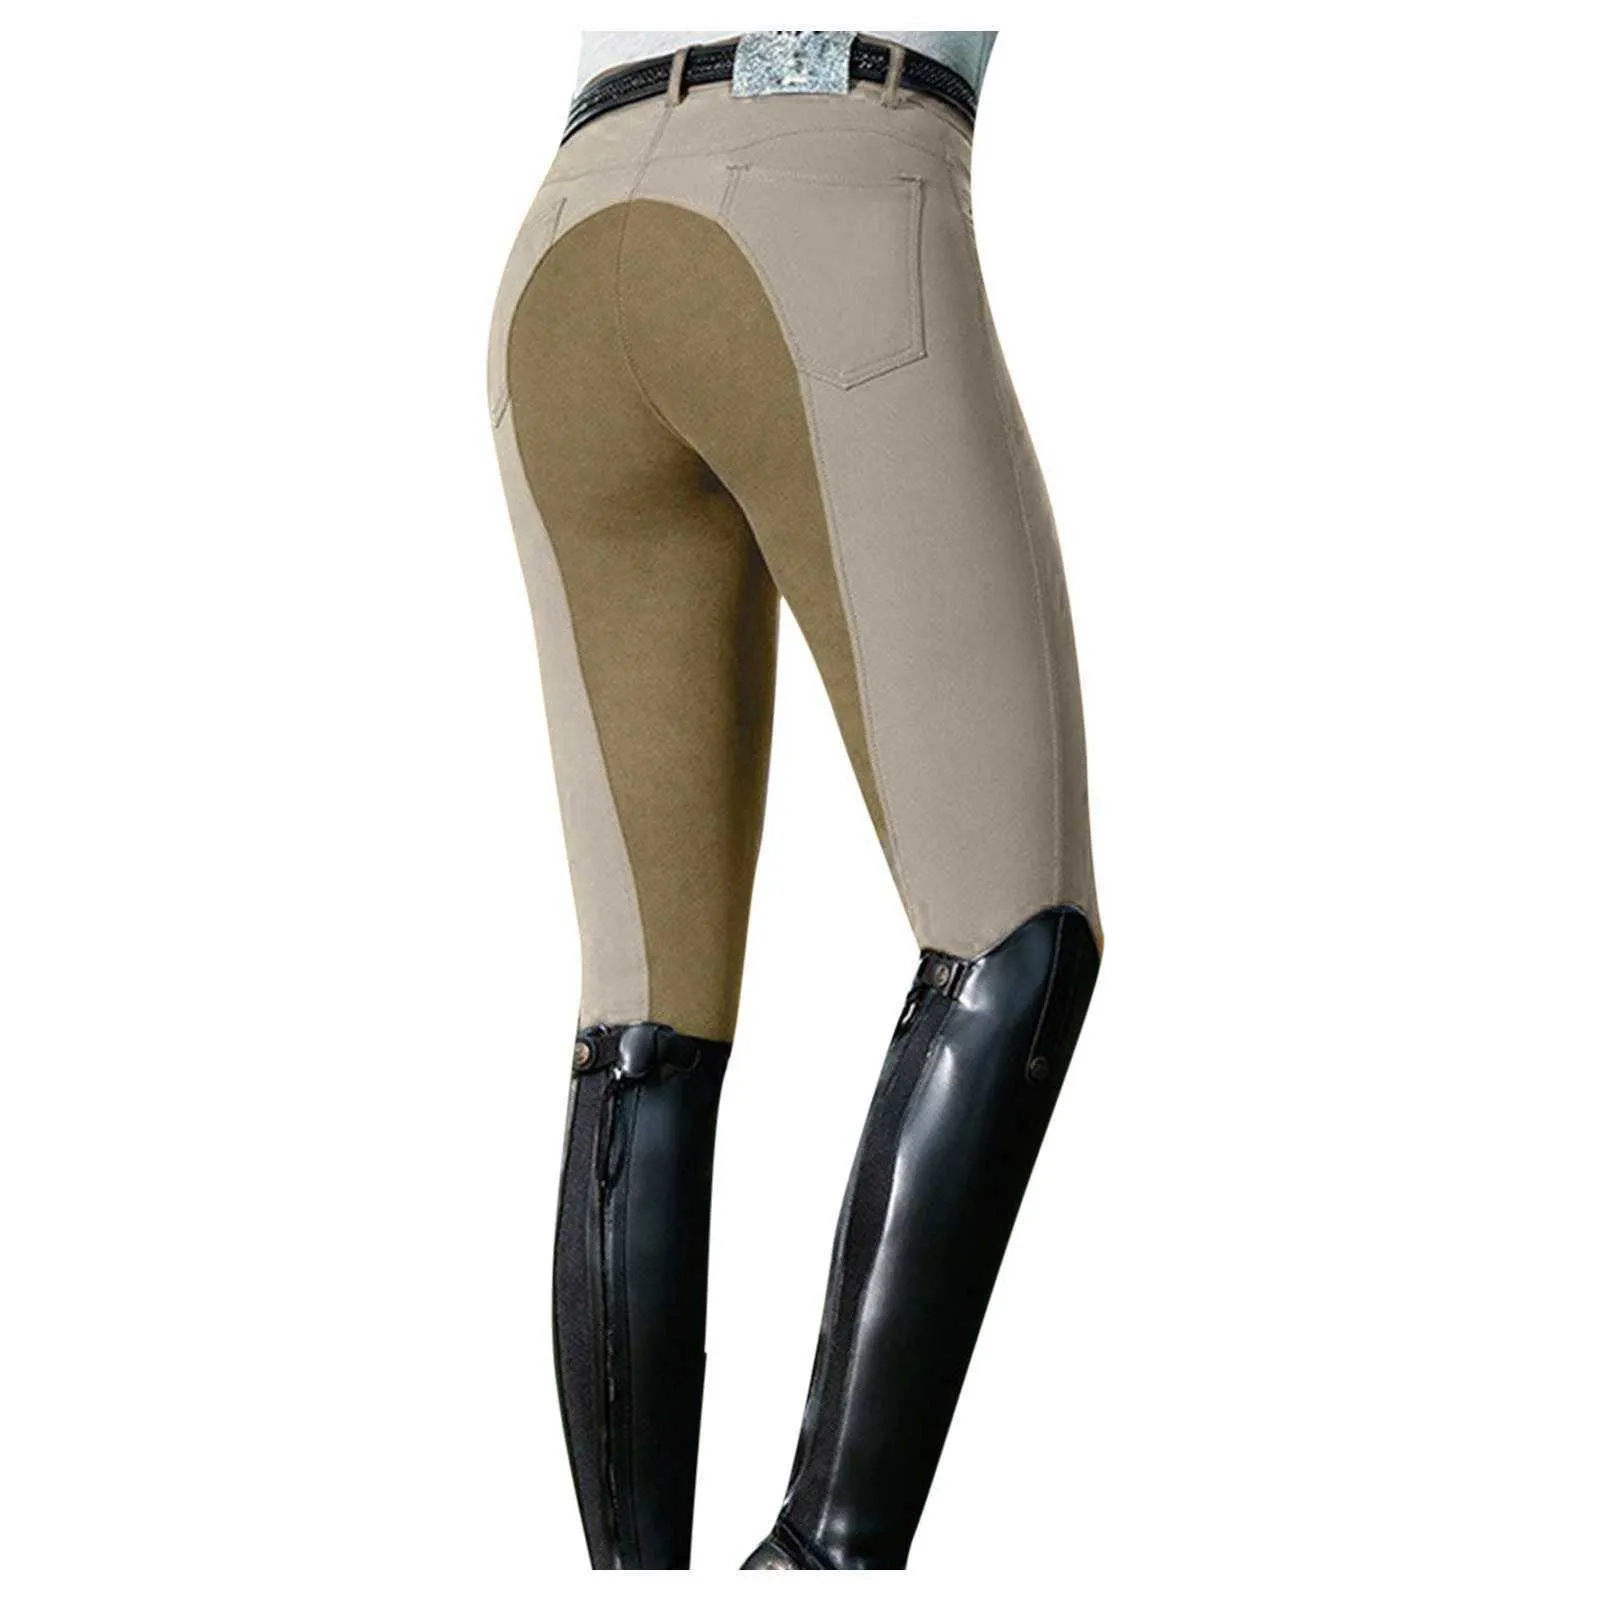 Trousers Womens Horse Riding Camping Running Climbing Women's Riding Pants Exercise High Waist Sports Riding Equestrian Trousers Q0801